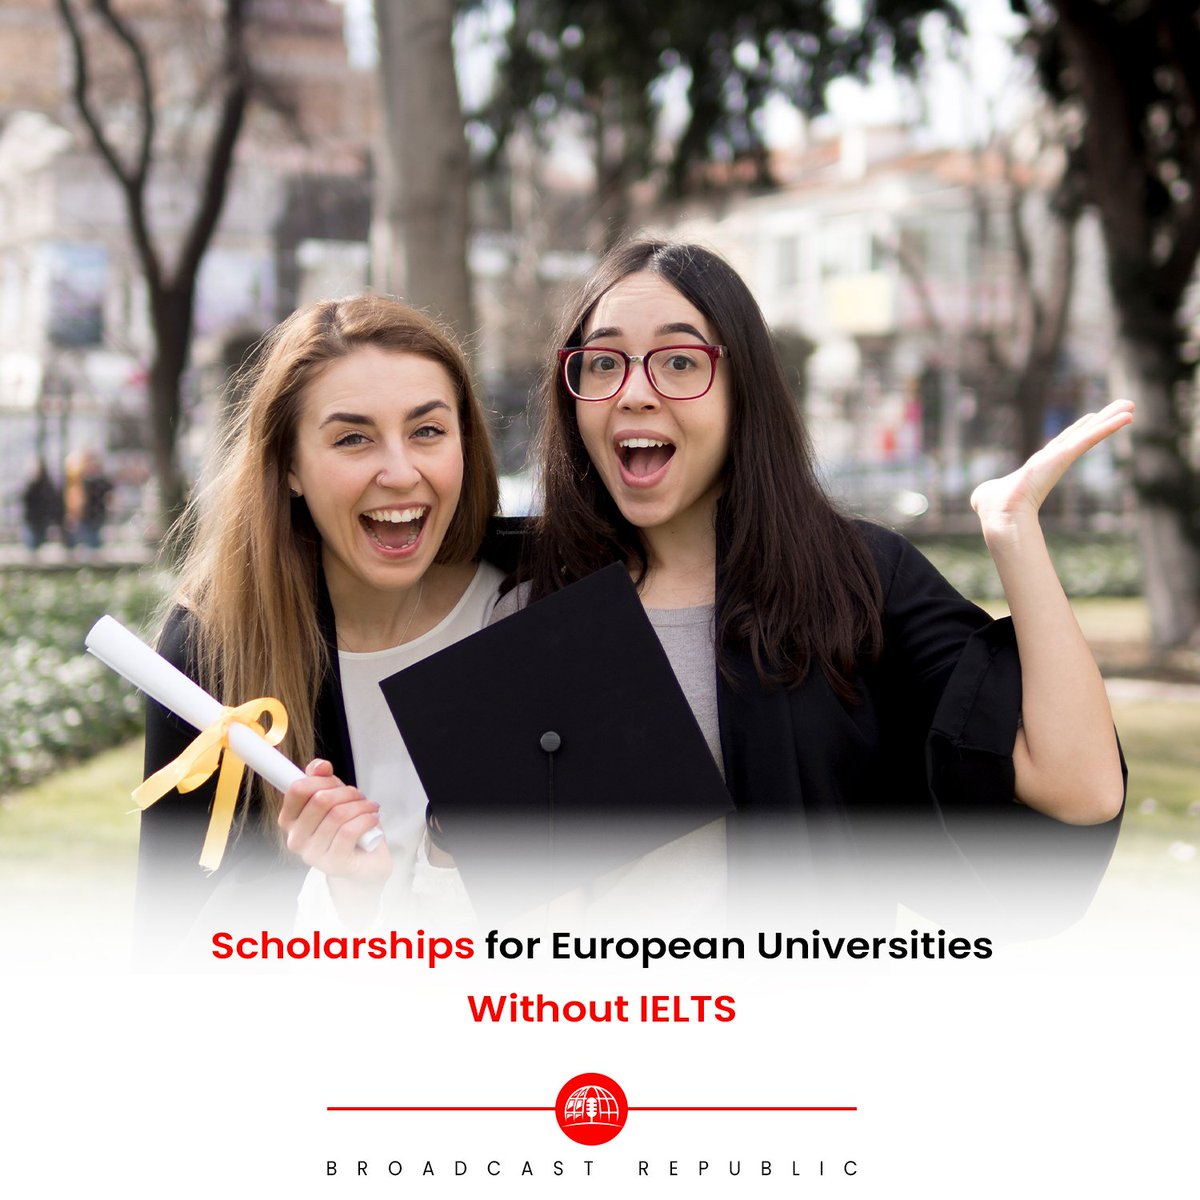 Studying in Europe without IELTS is now easier for international students, with many universities accepting alternative language tests or offering preparatory courses. #BroadcastRepublic #StudyinEurope #Scholarships #NoIELTS #InternationalStudents #ErasmusMundus #LanguageTests